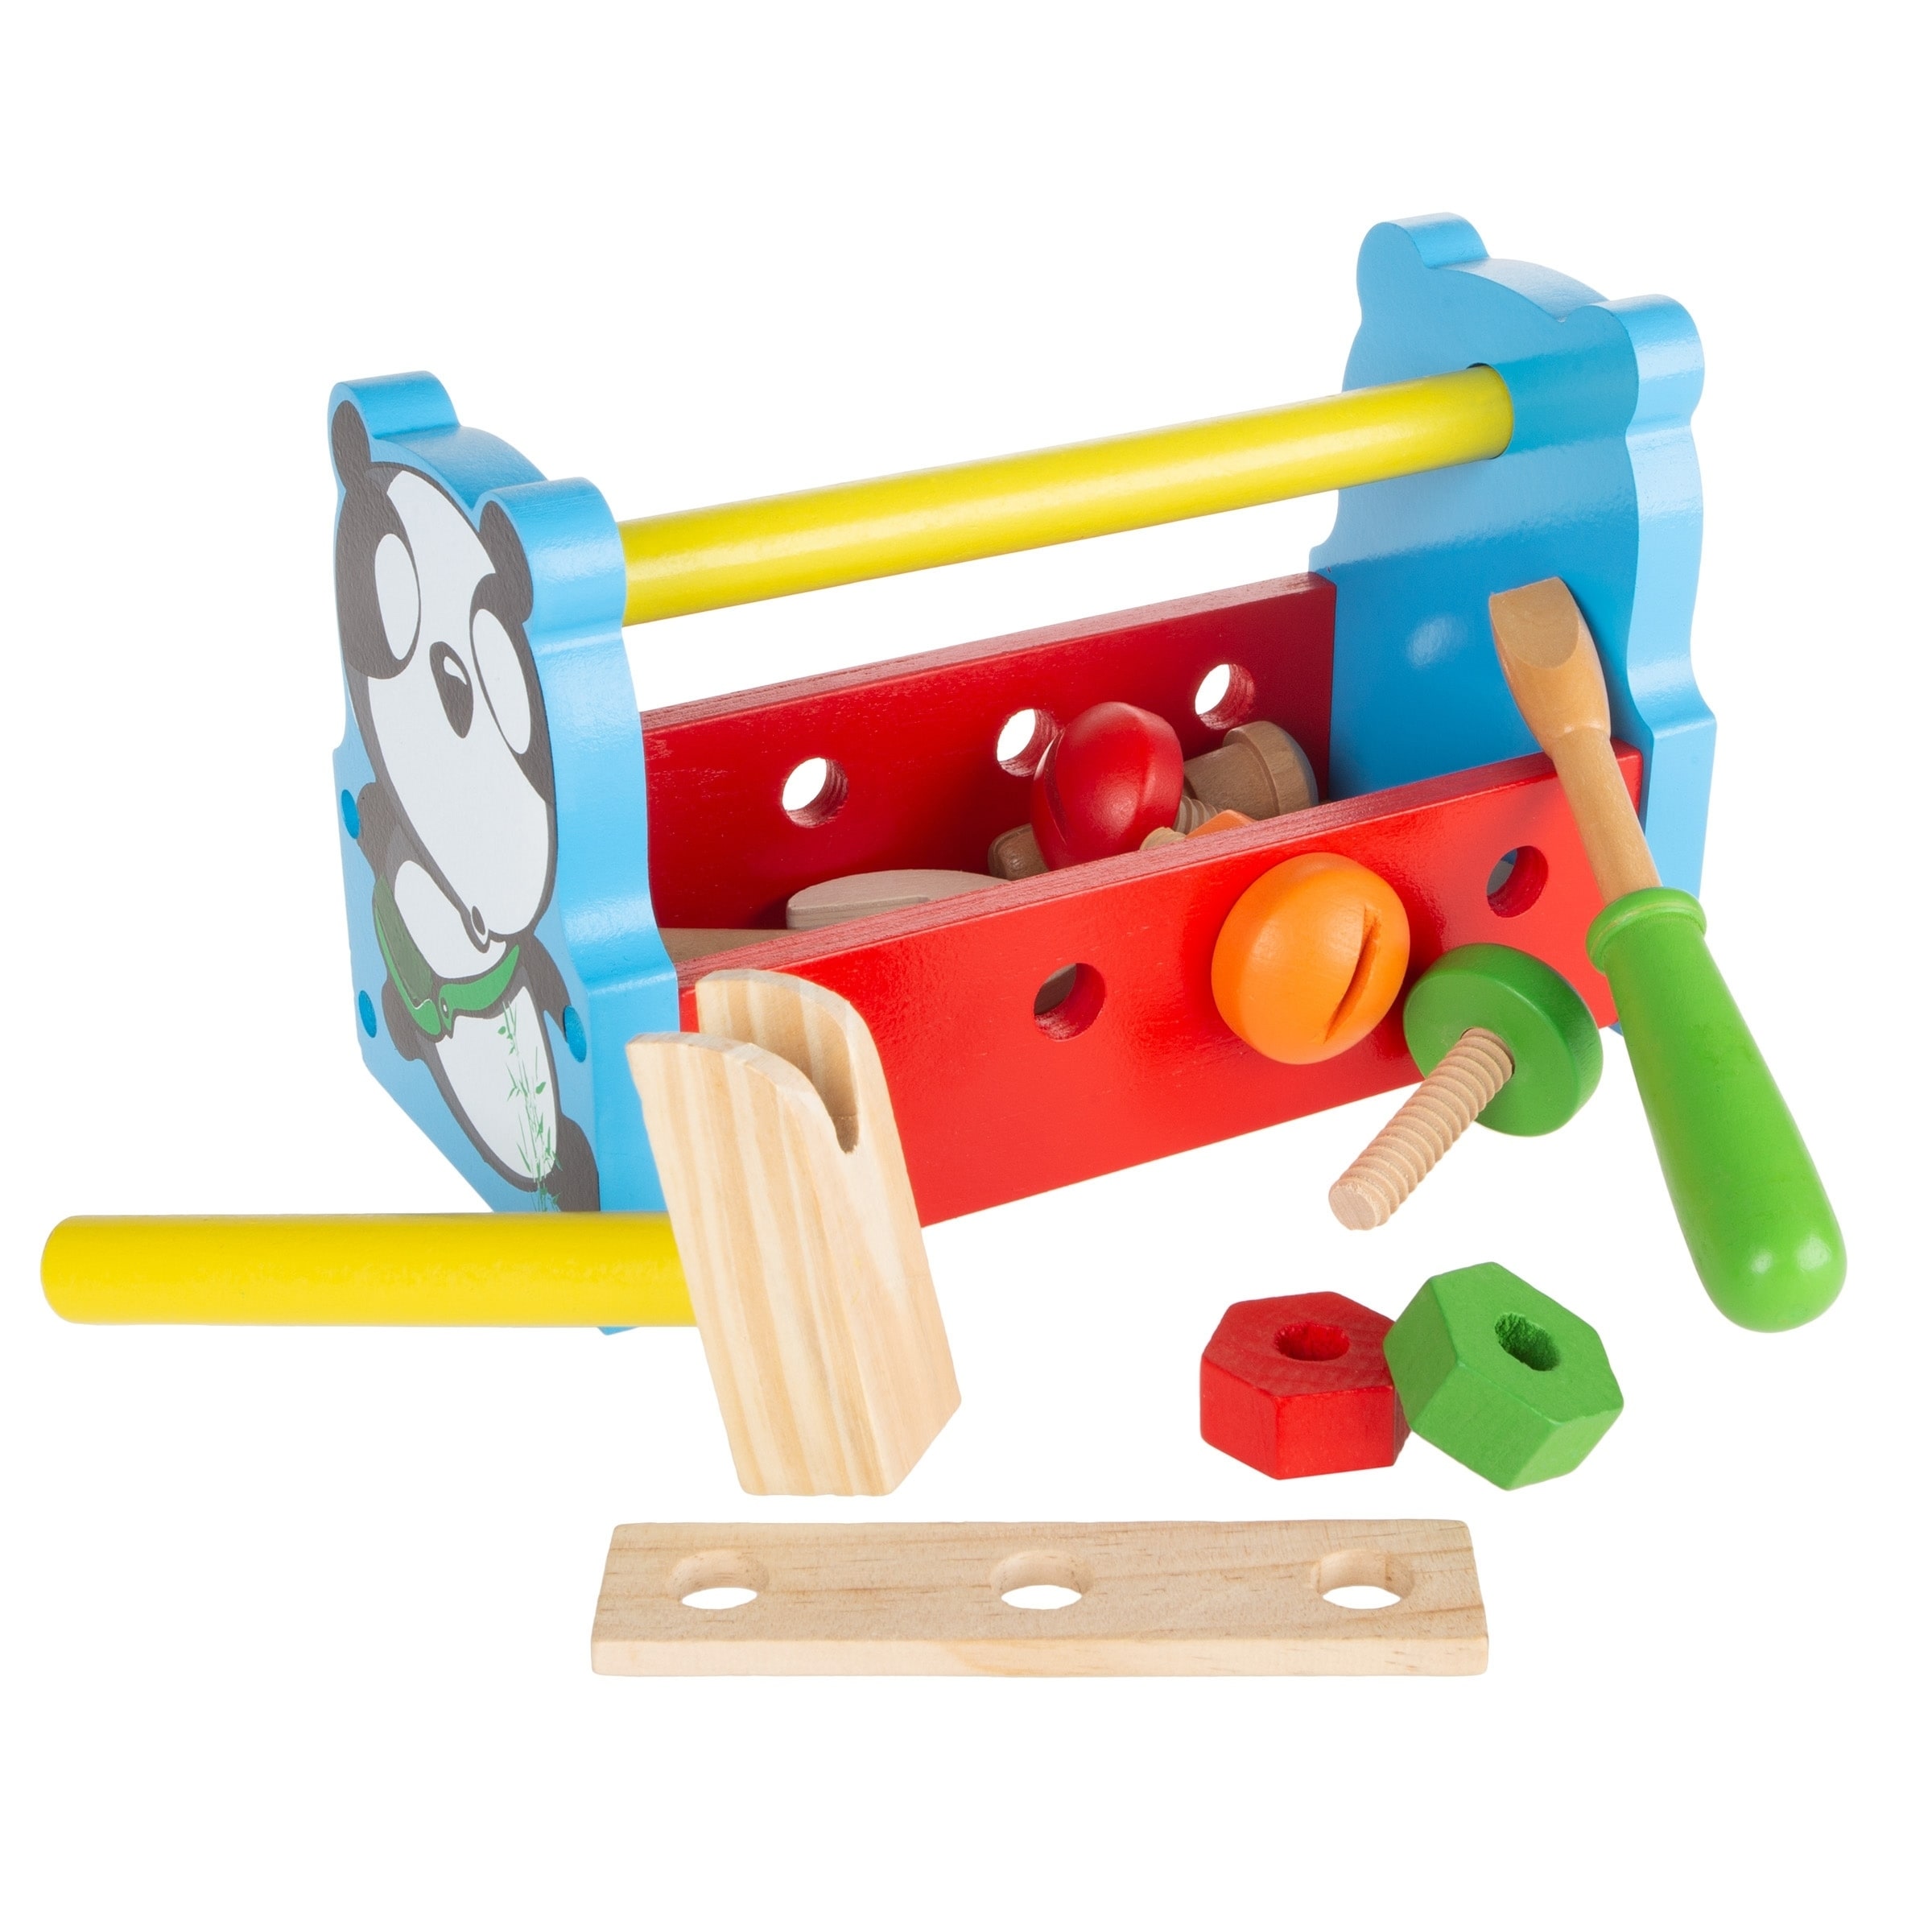 play tool sets for toddlers